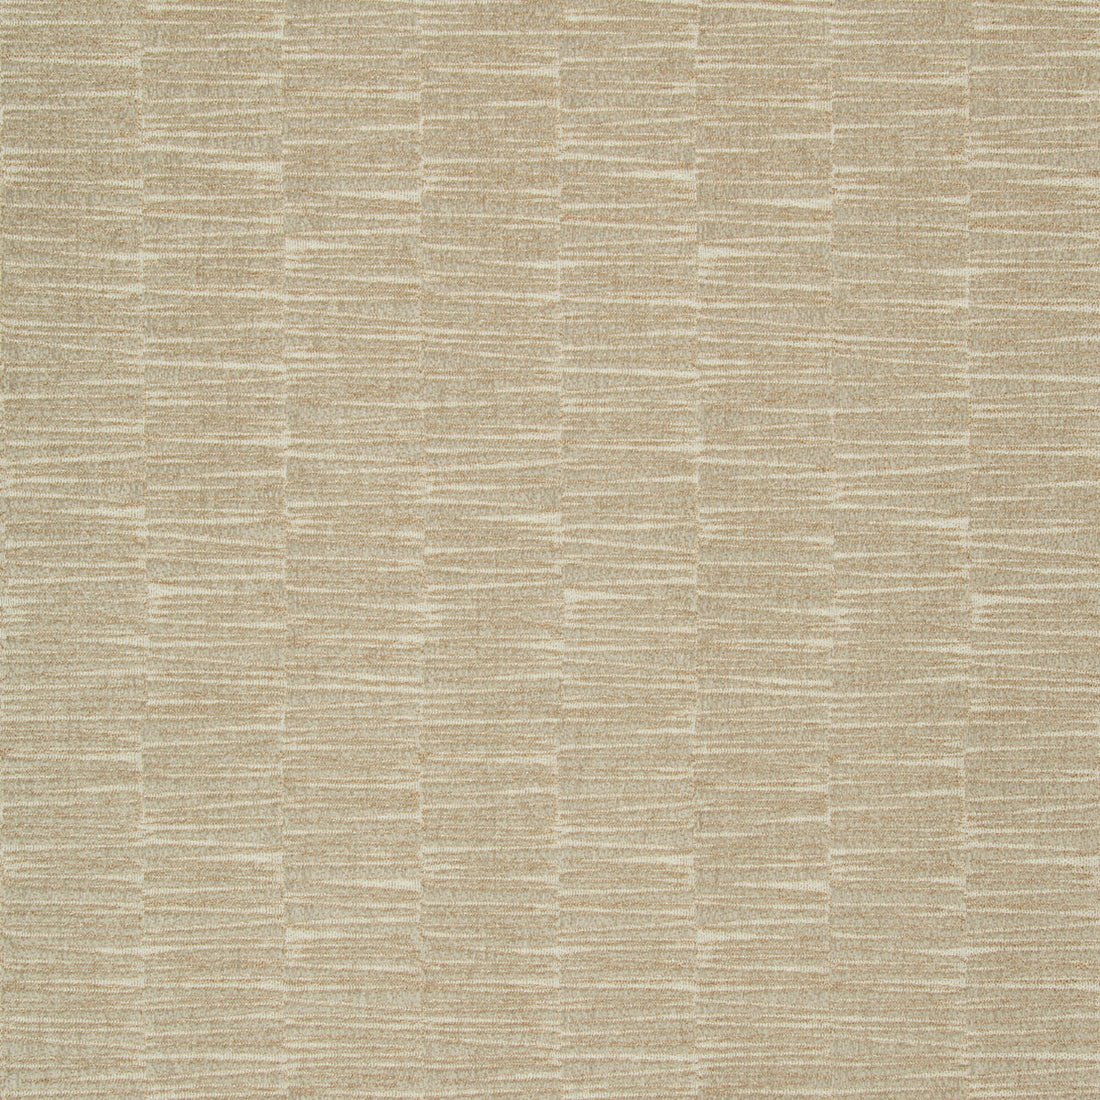 Upriver fabric in pebble color - pattern 34851.16.0 - by Kravet Basics in the Thom Filicia Altitude collection